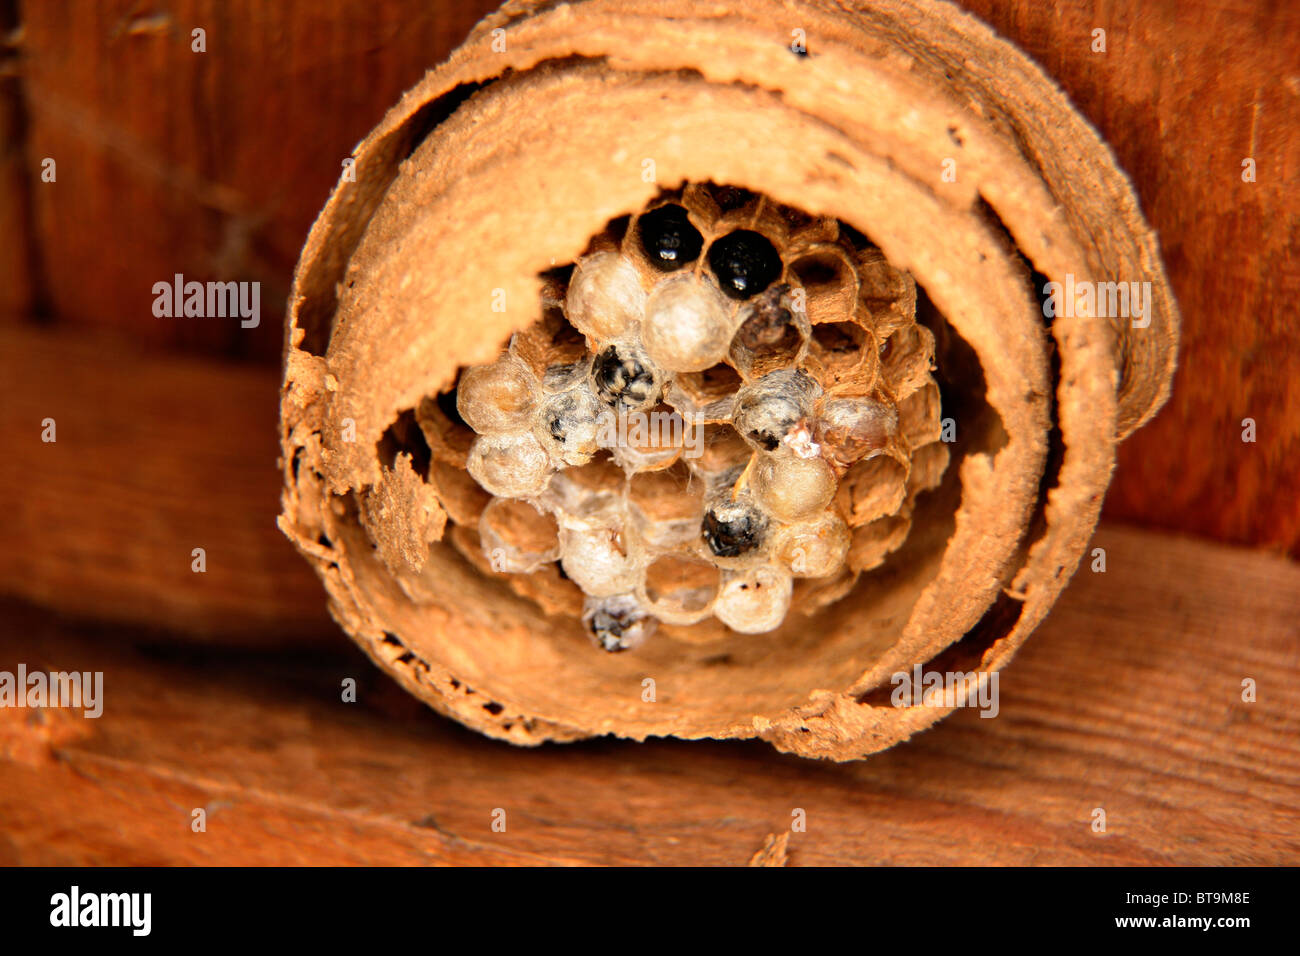 Solitary Wasp Nest in a Garden Shed Stock Photo